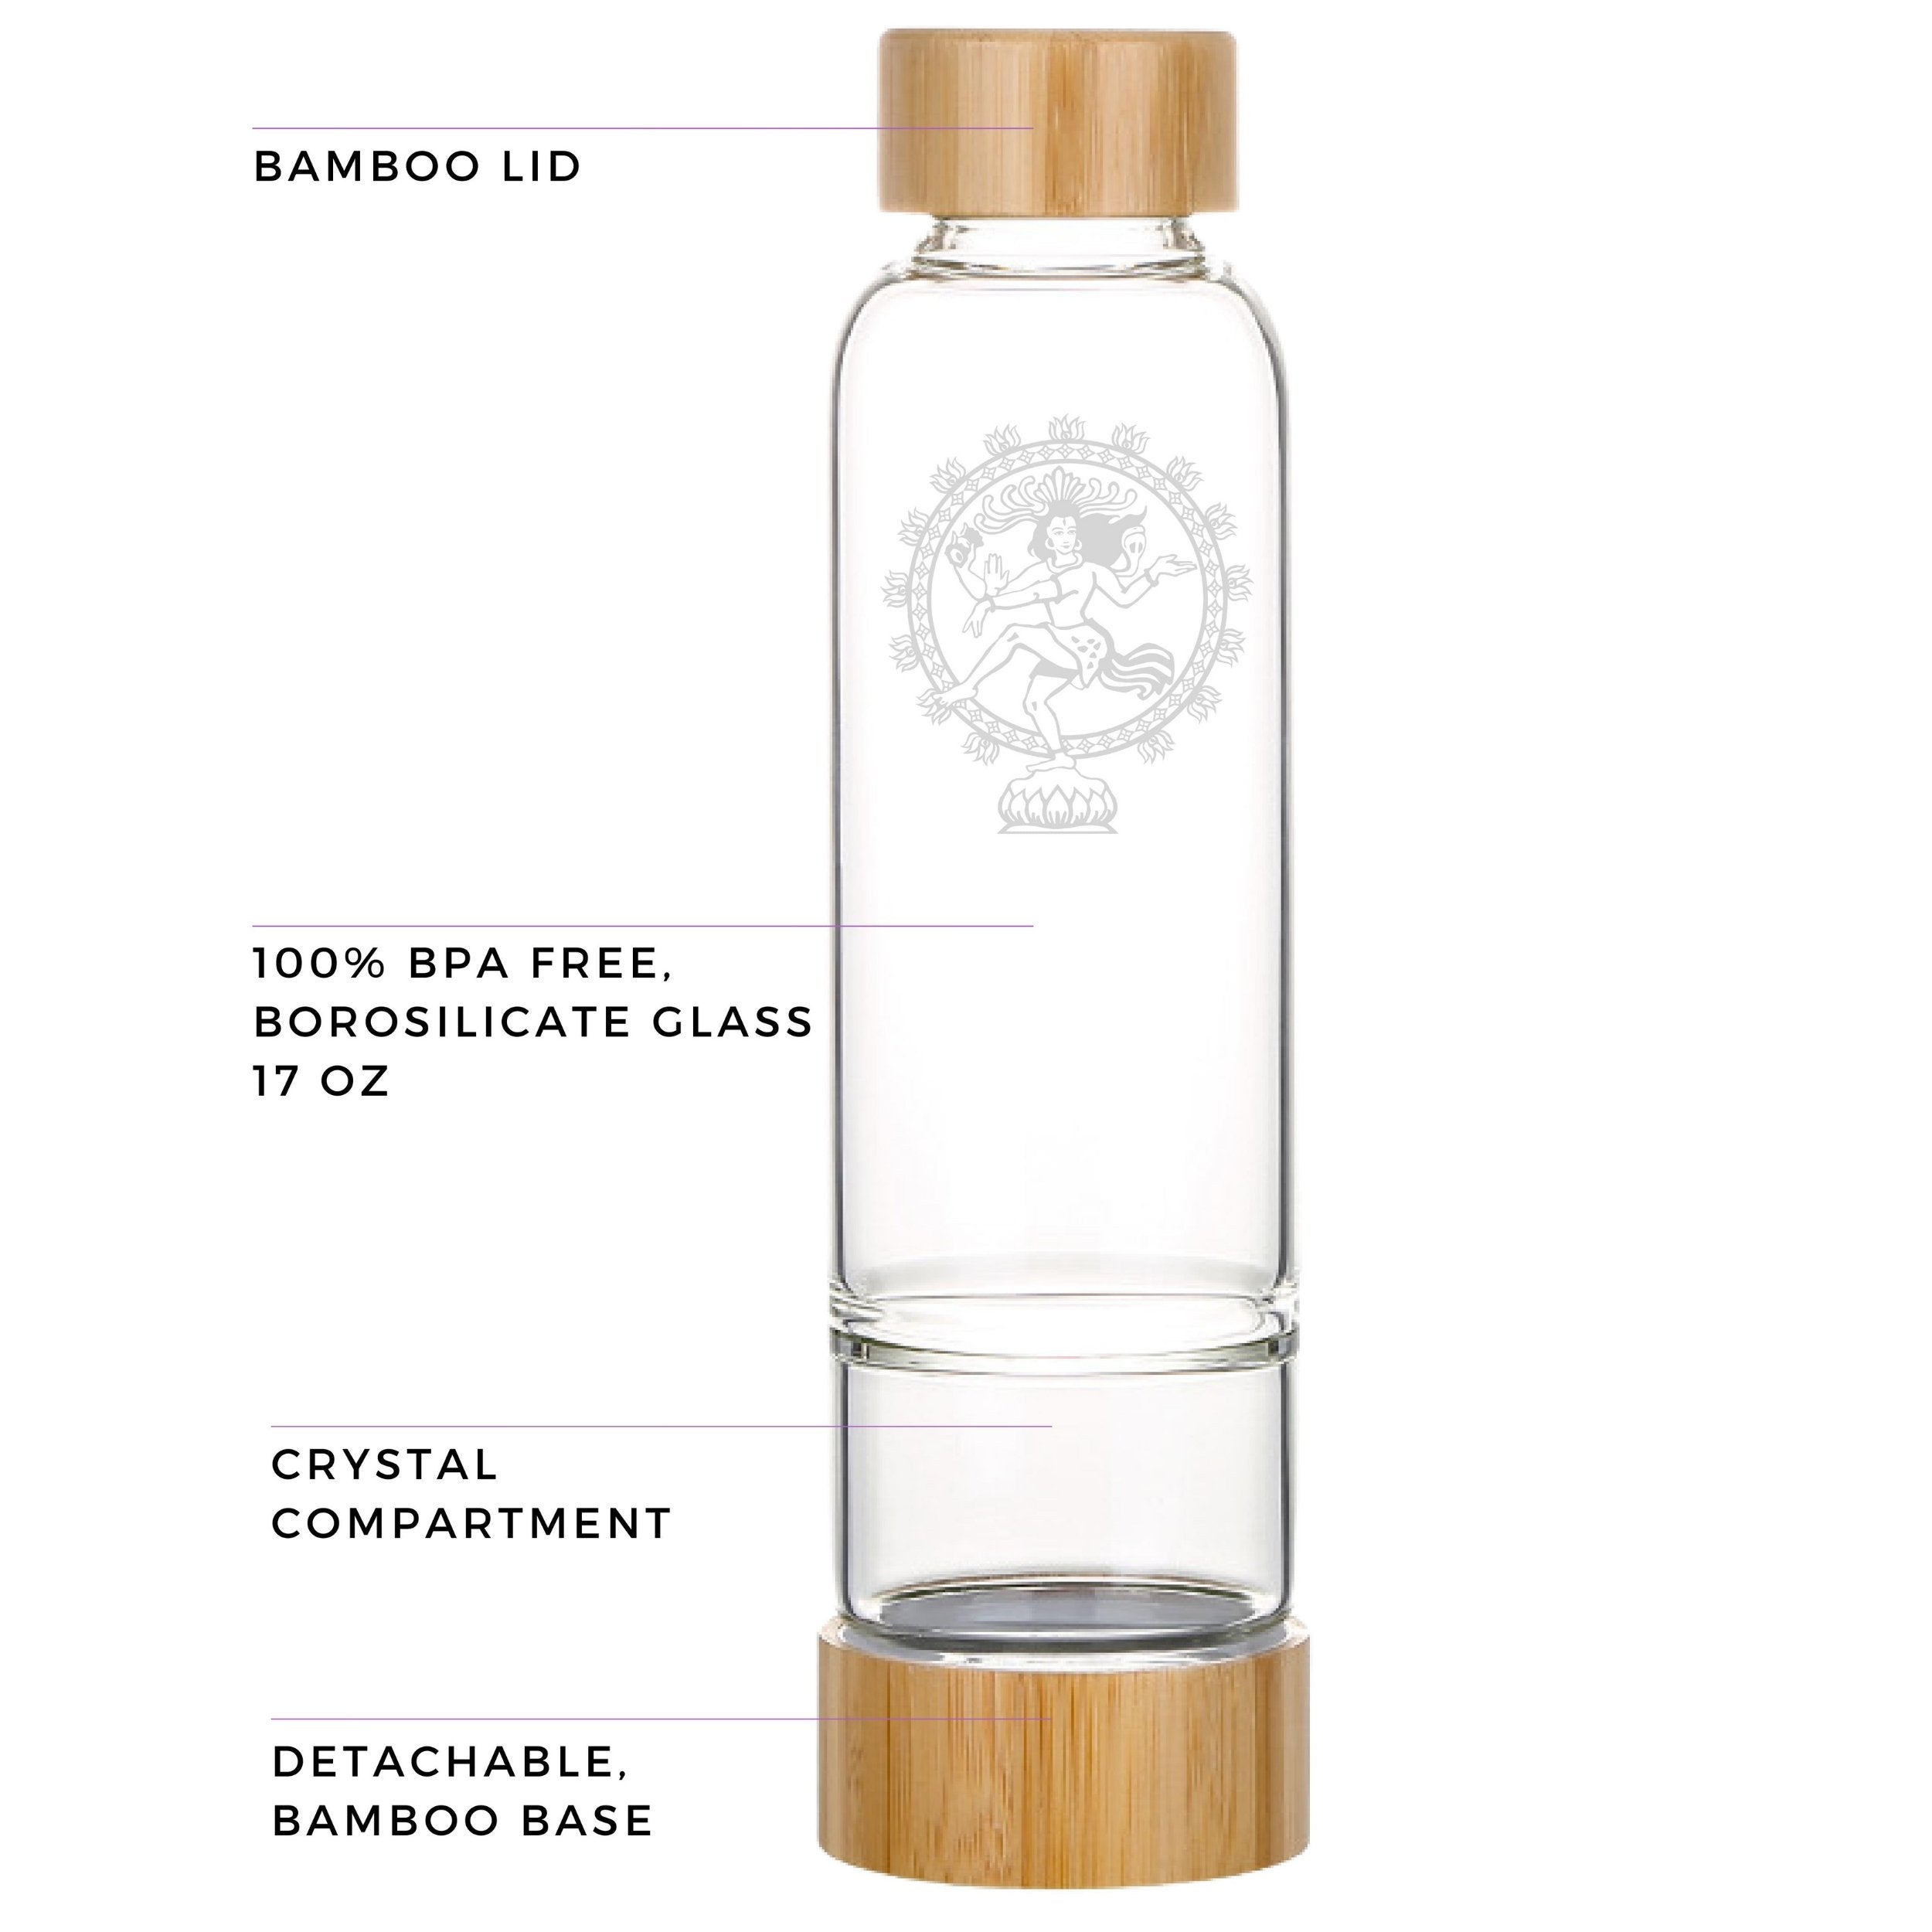 Benefits of Howlite Bamboo Crystal Water Bottle